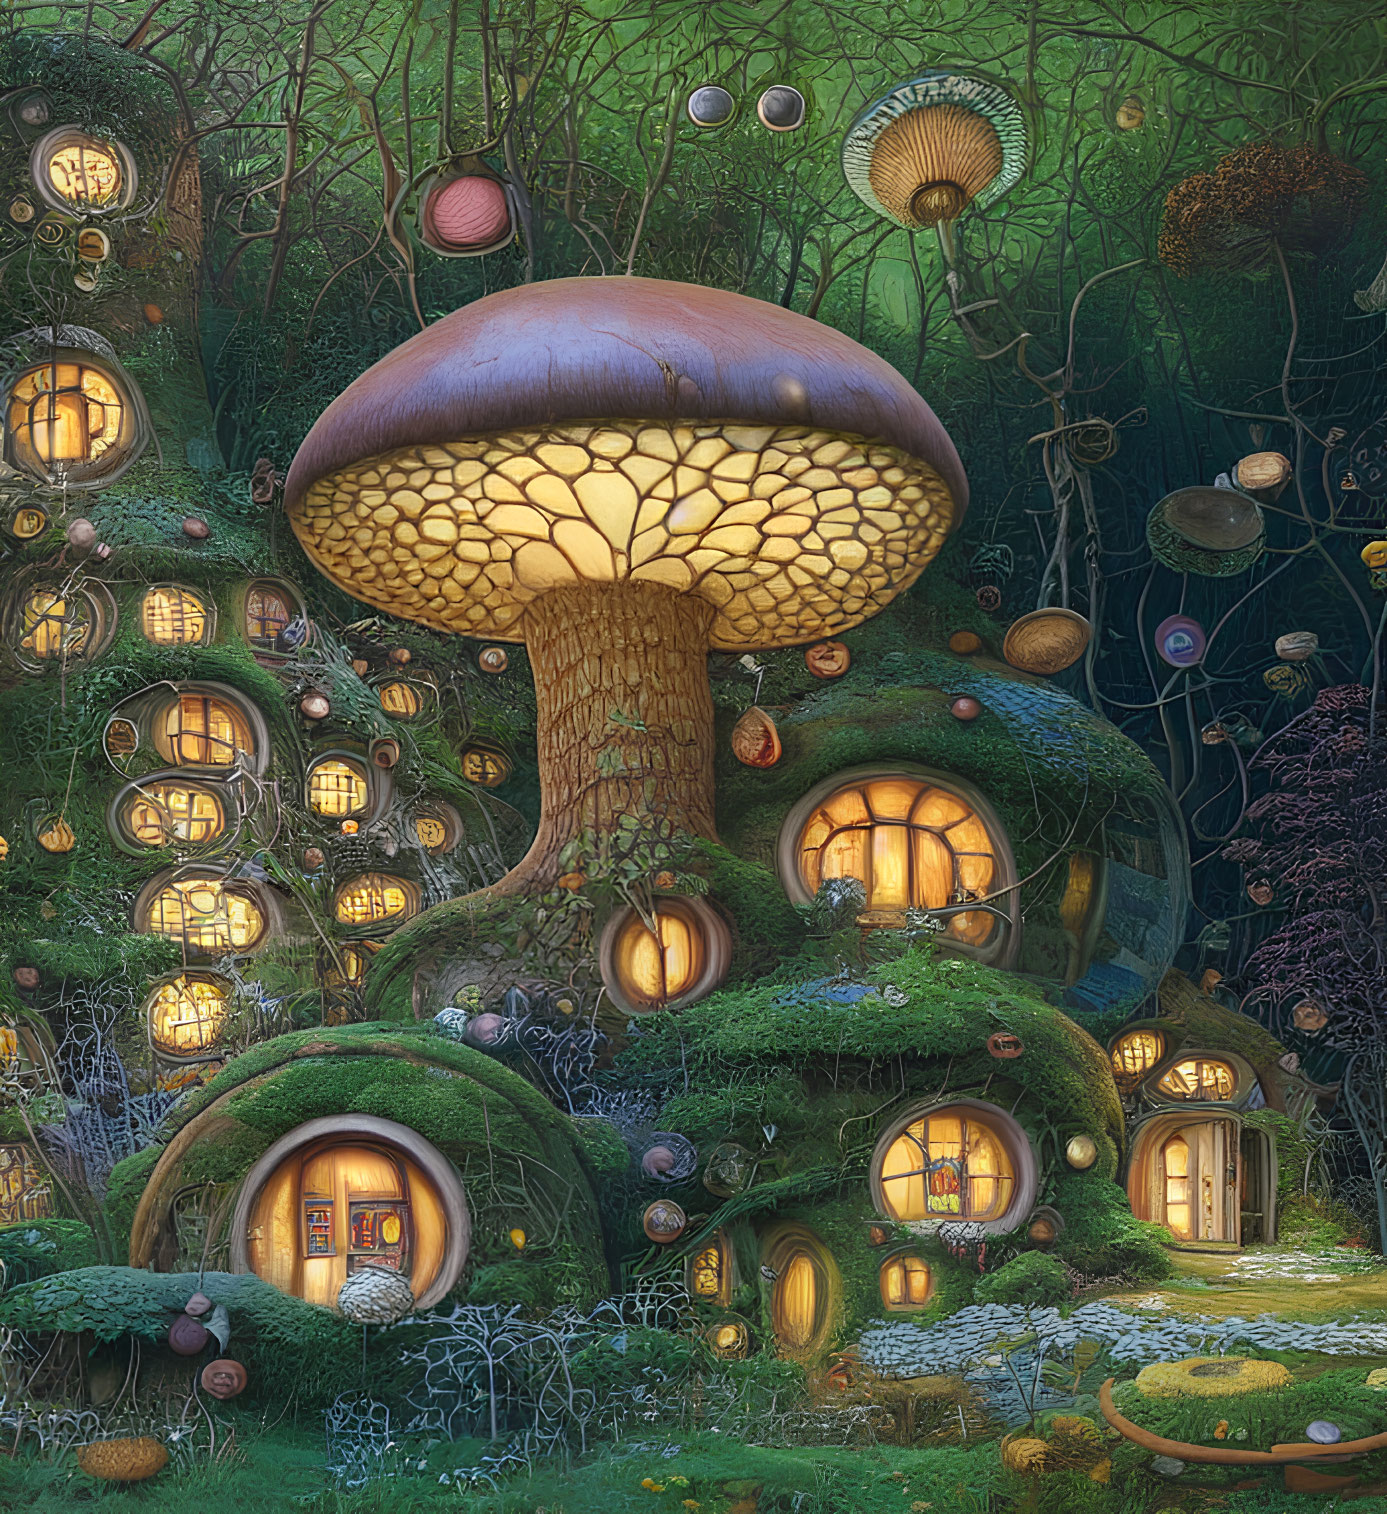 Magical fairytale mushroom village in whimsical forest at night